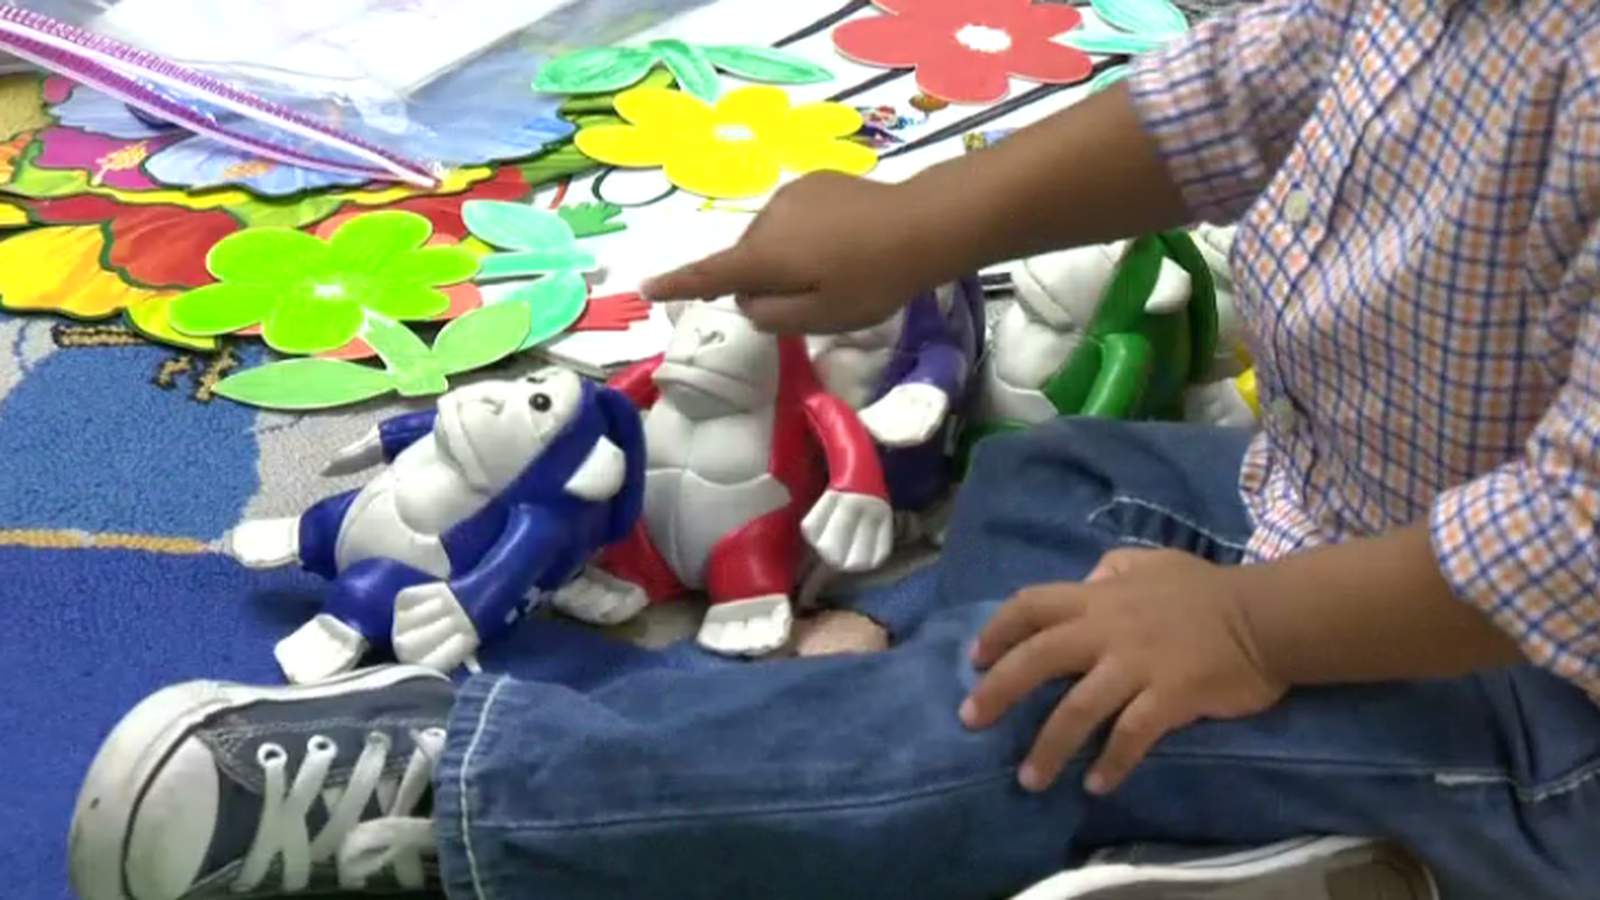 Does your child want to be a toy tester? Find out how you can sign them up